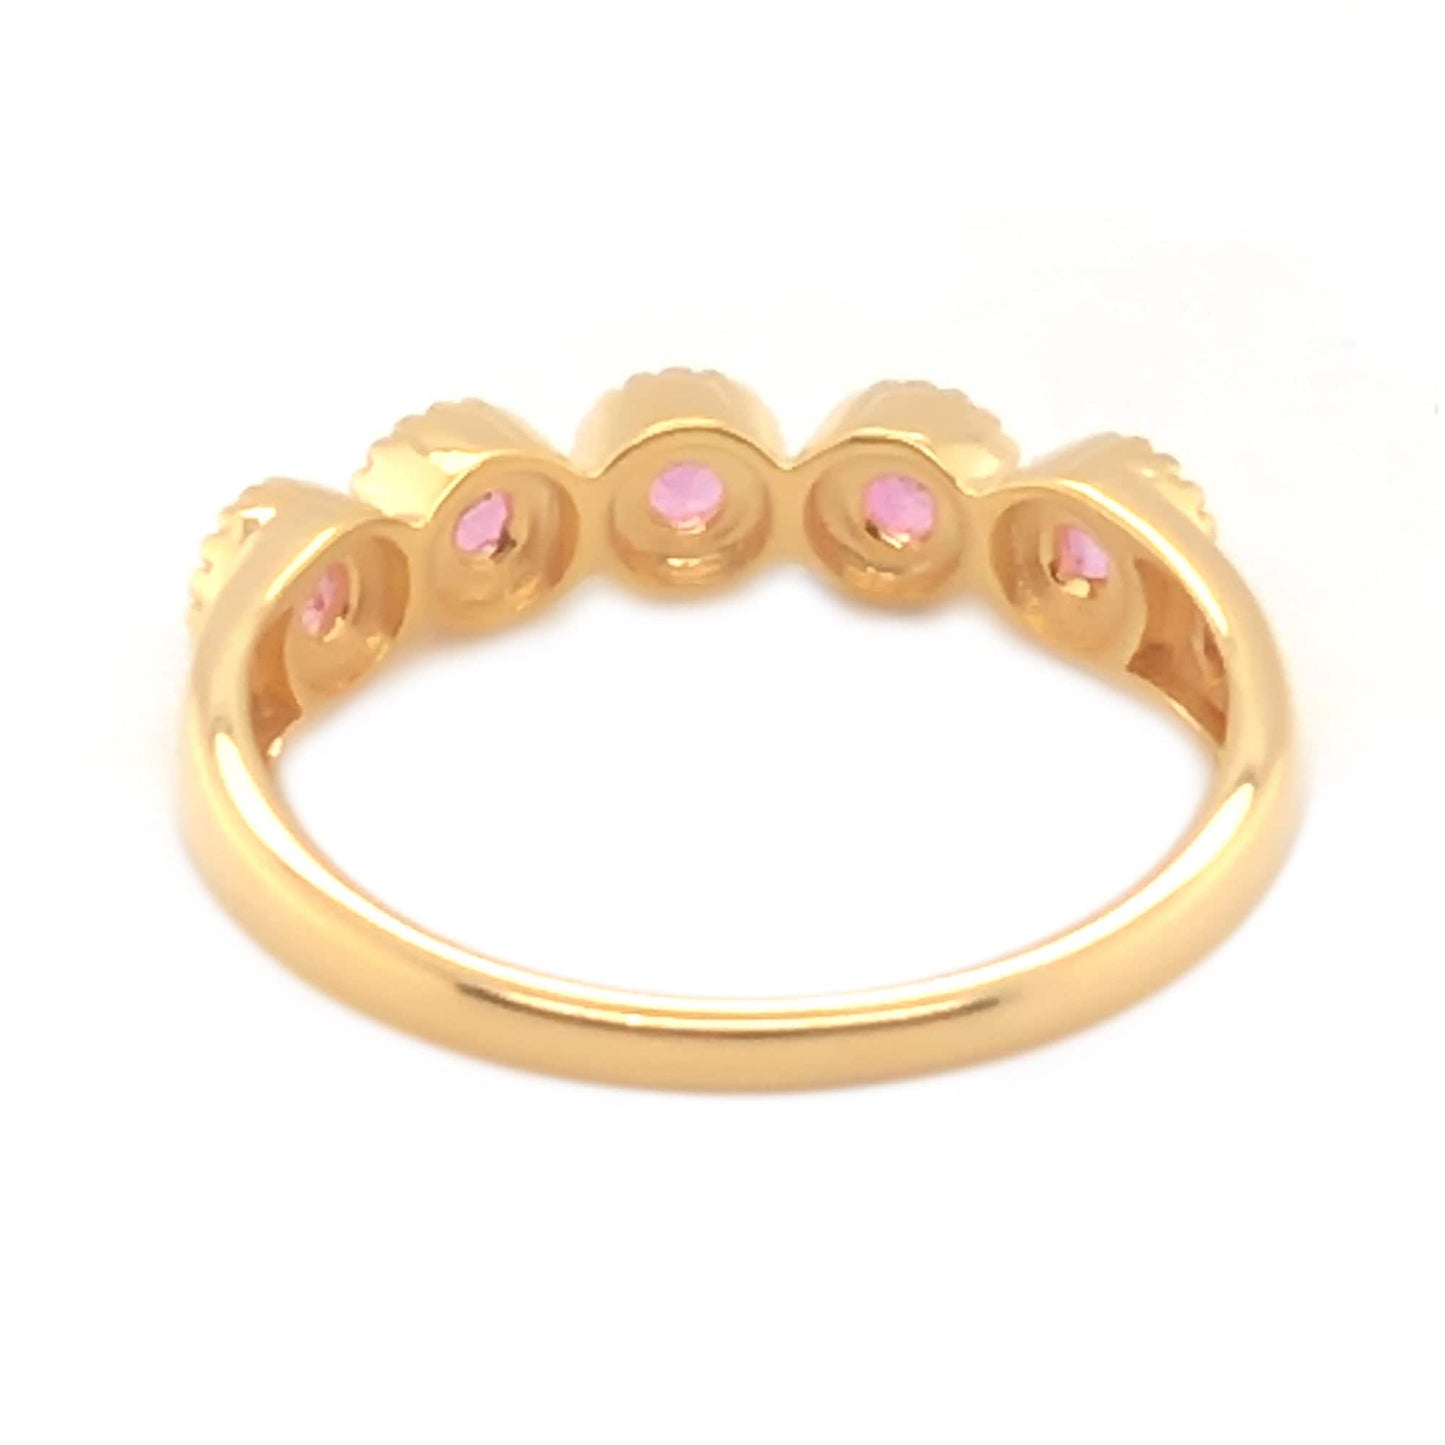 Pink Topaz Gemstone Ring, 925 Sterling Silver Over Gold Plated Ring, Anniversary Gift, Gift For Her, Ring For Women's